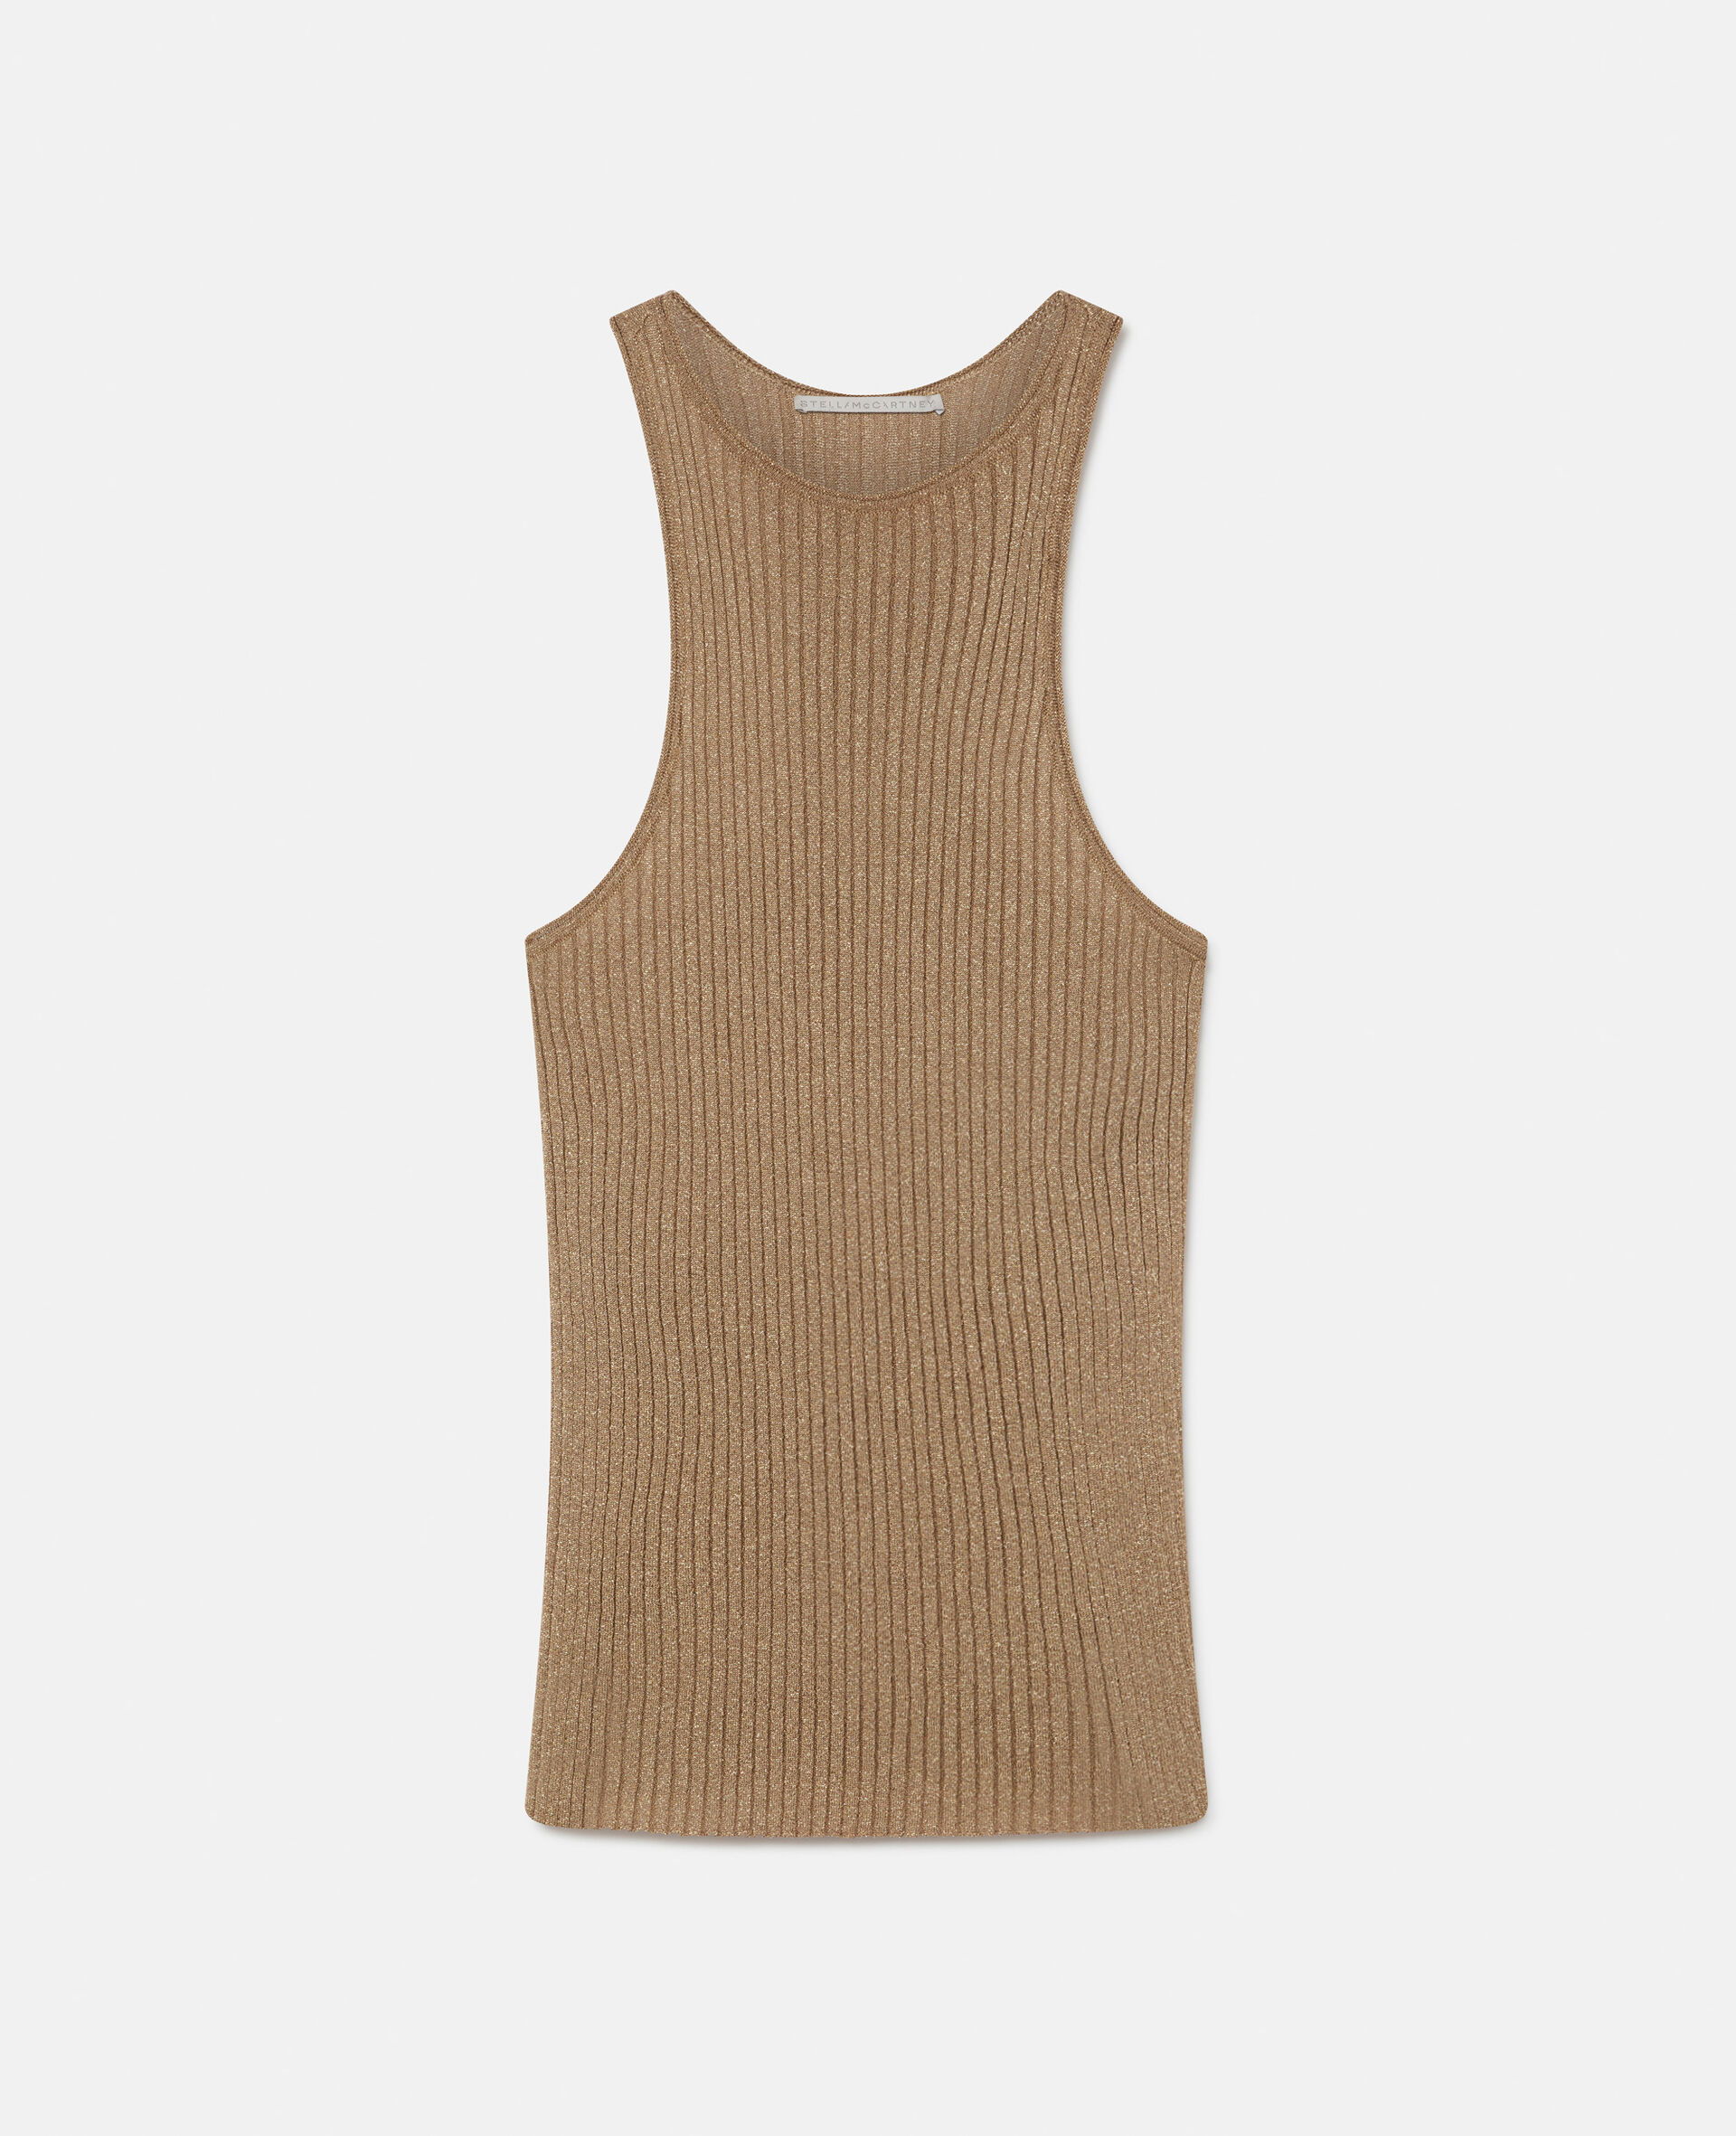 Sparkle Knit Racer Tank Top-Yellow-large image number 0